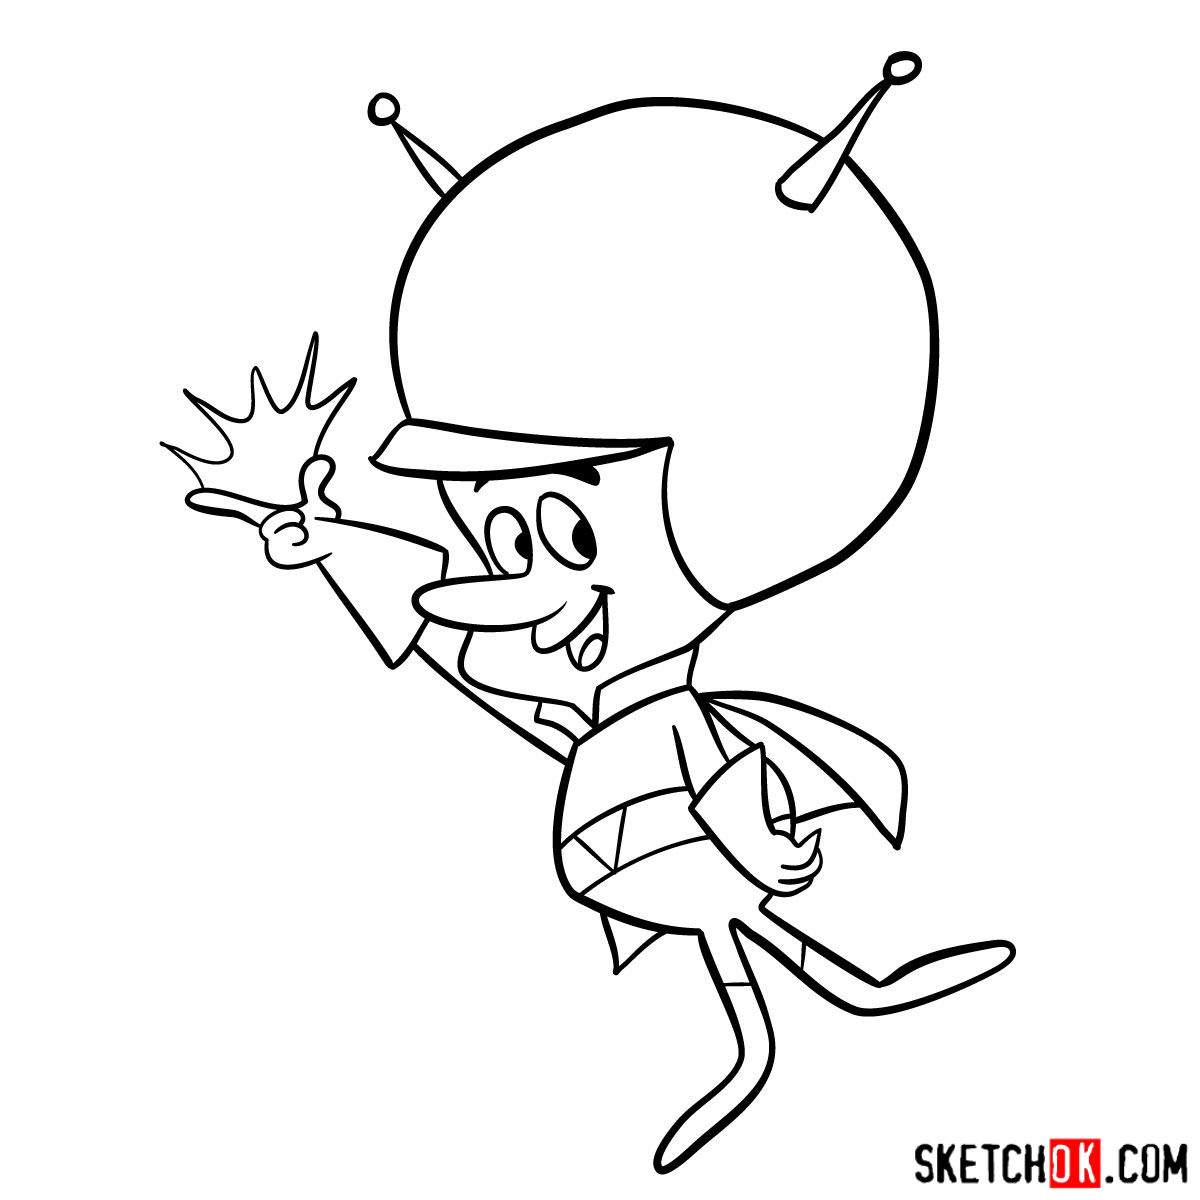 How to draw The Great Gazoo - step 10